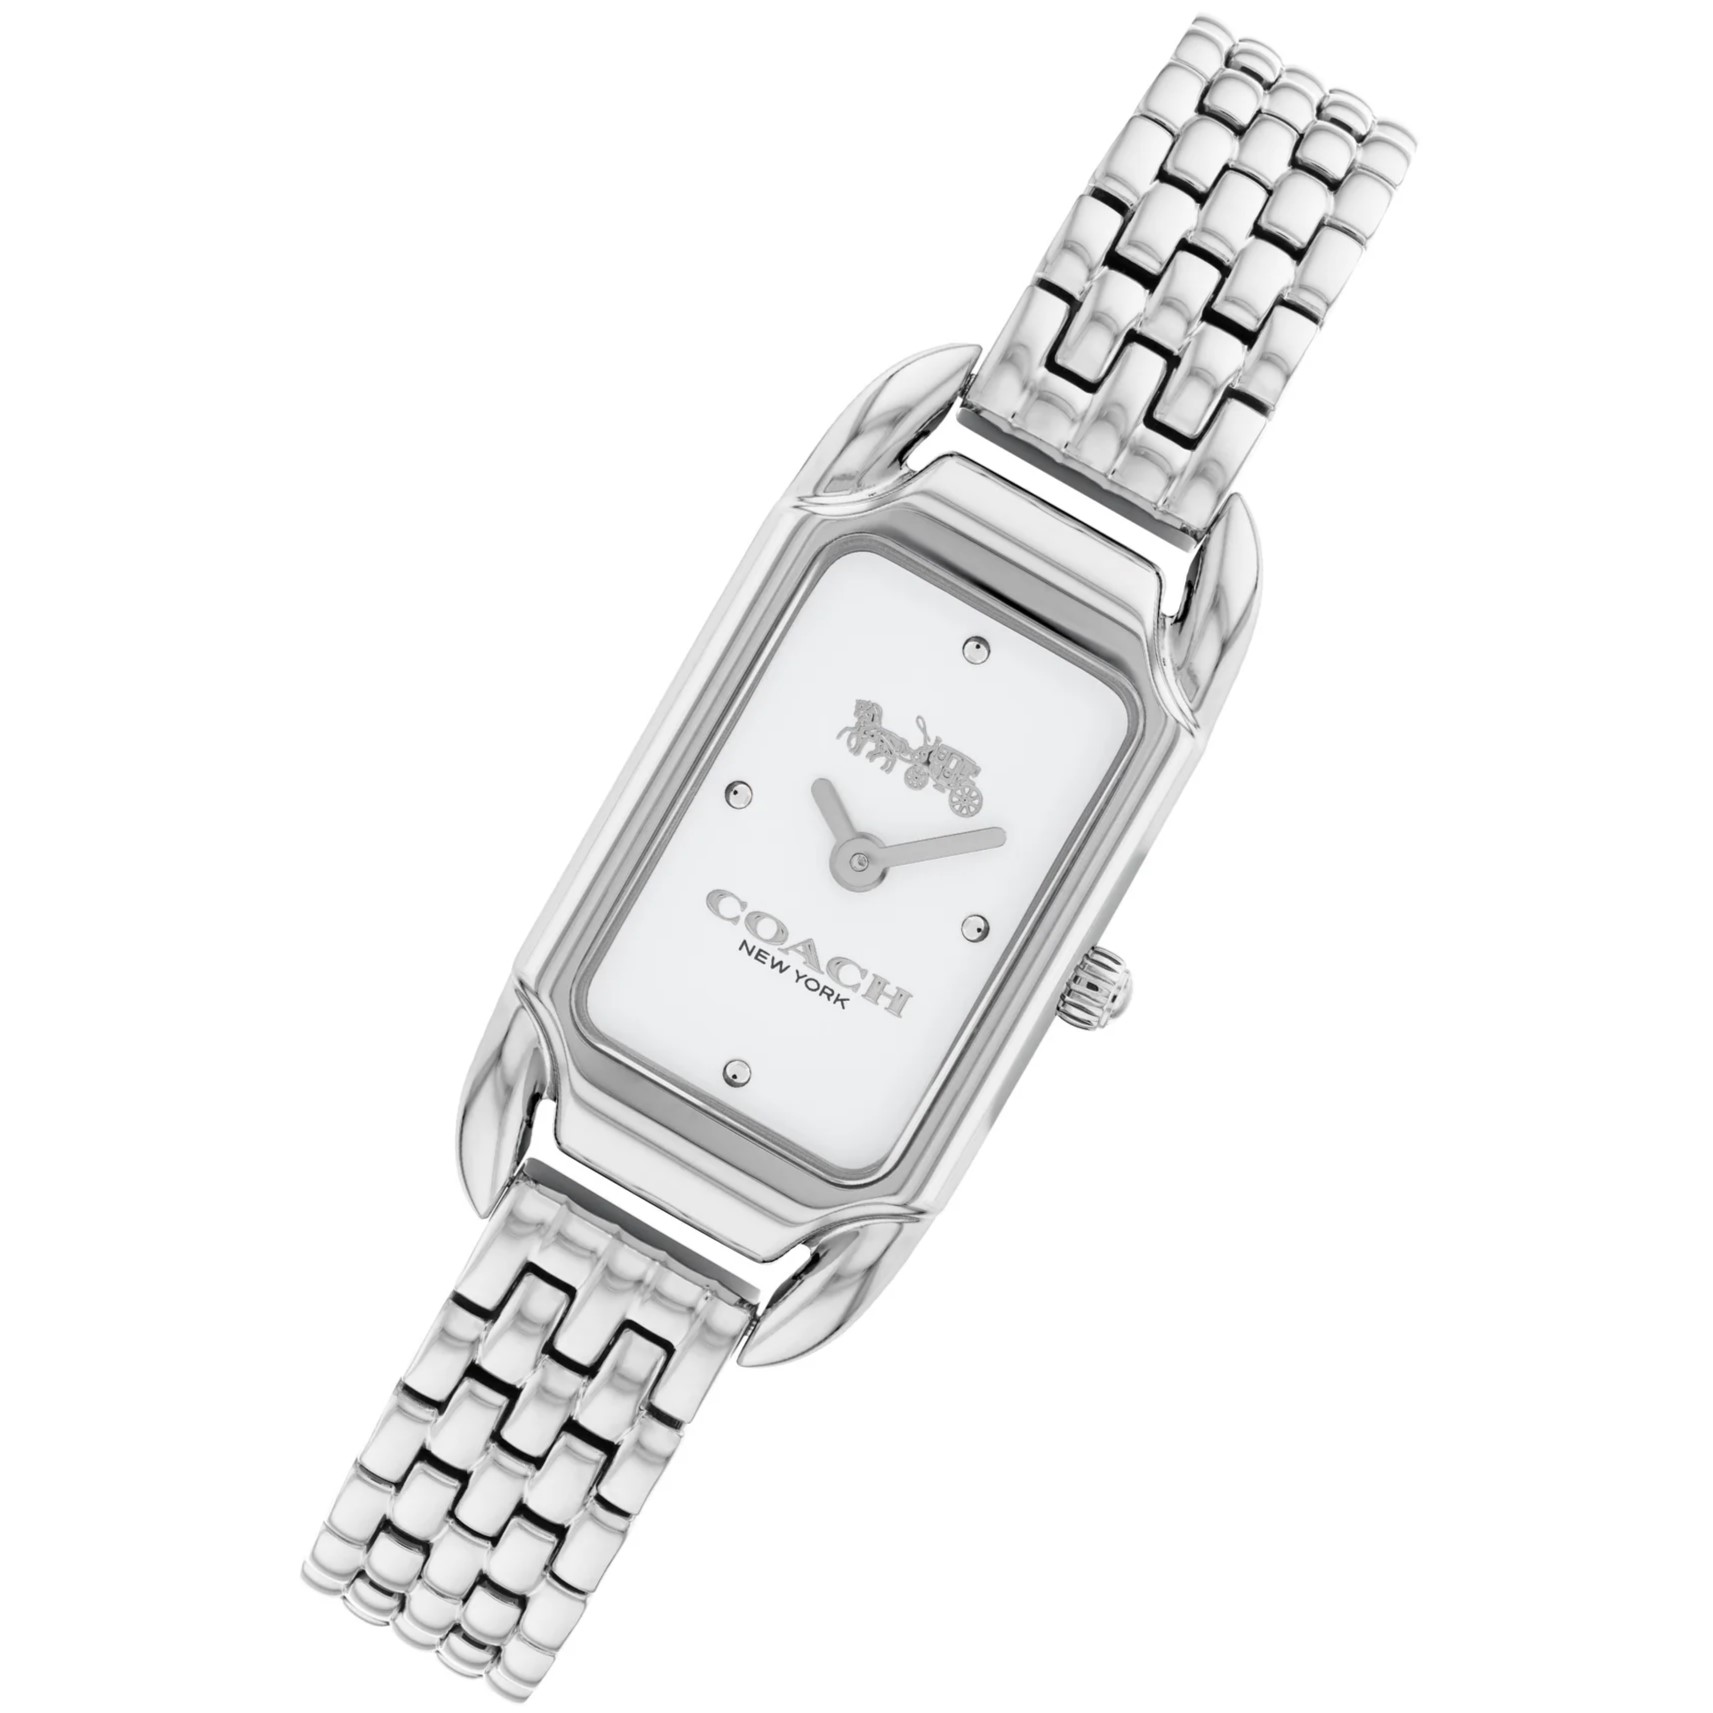 ĐỒNG HỒ NỮ COACH CADIE SILVER STAINLESS STEEL WHITE DIAL WOMENS WATCH 14504035 9